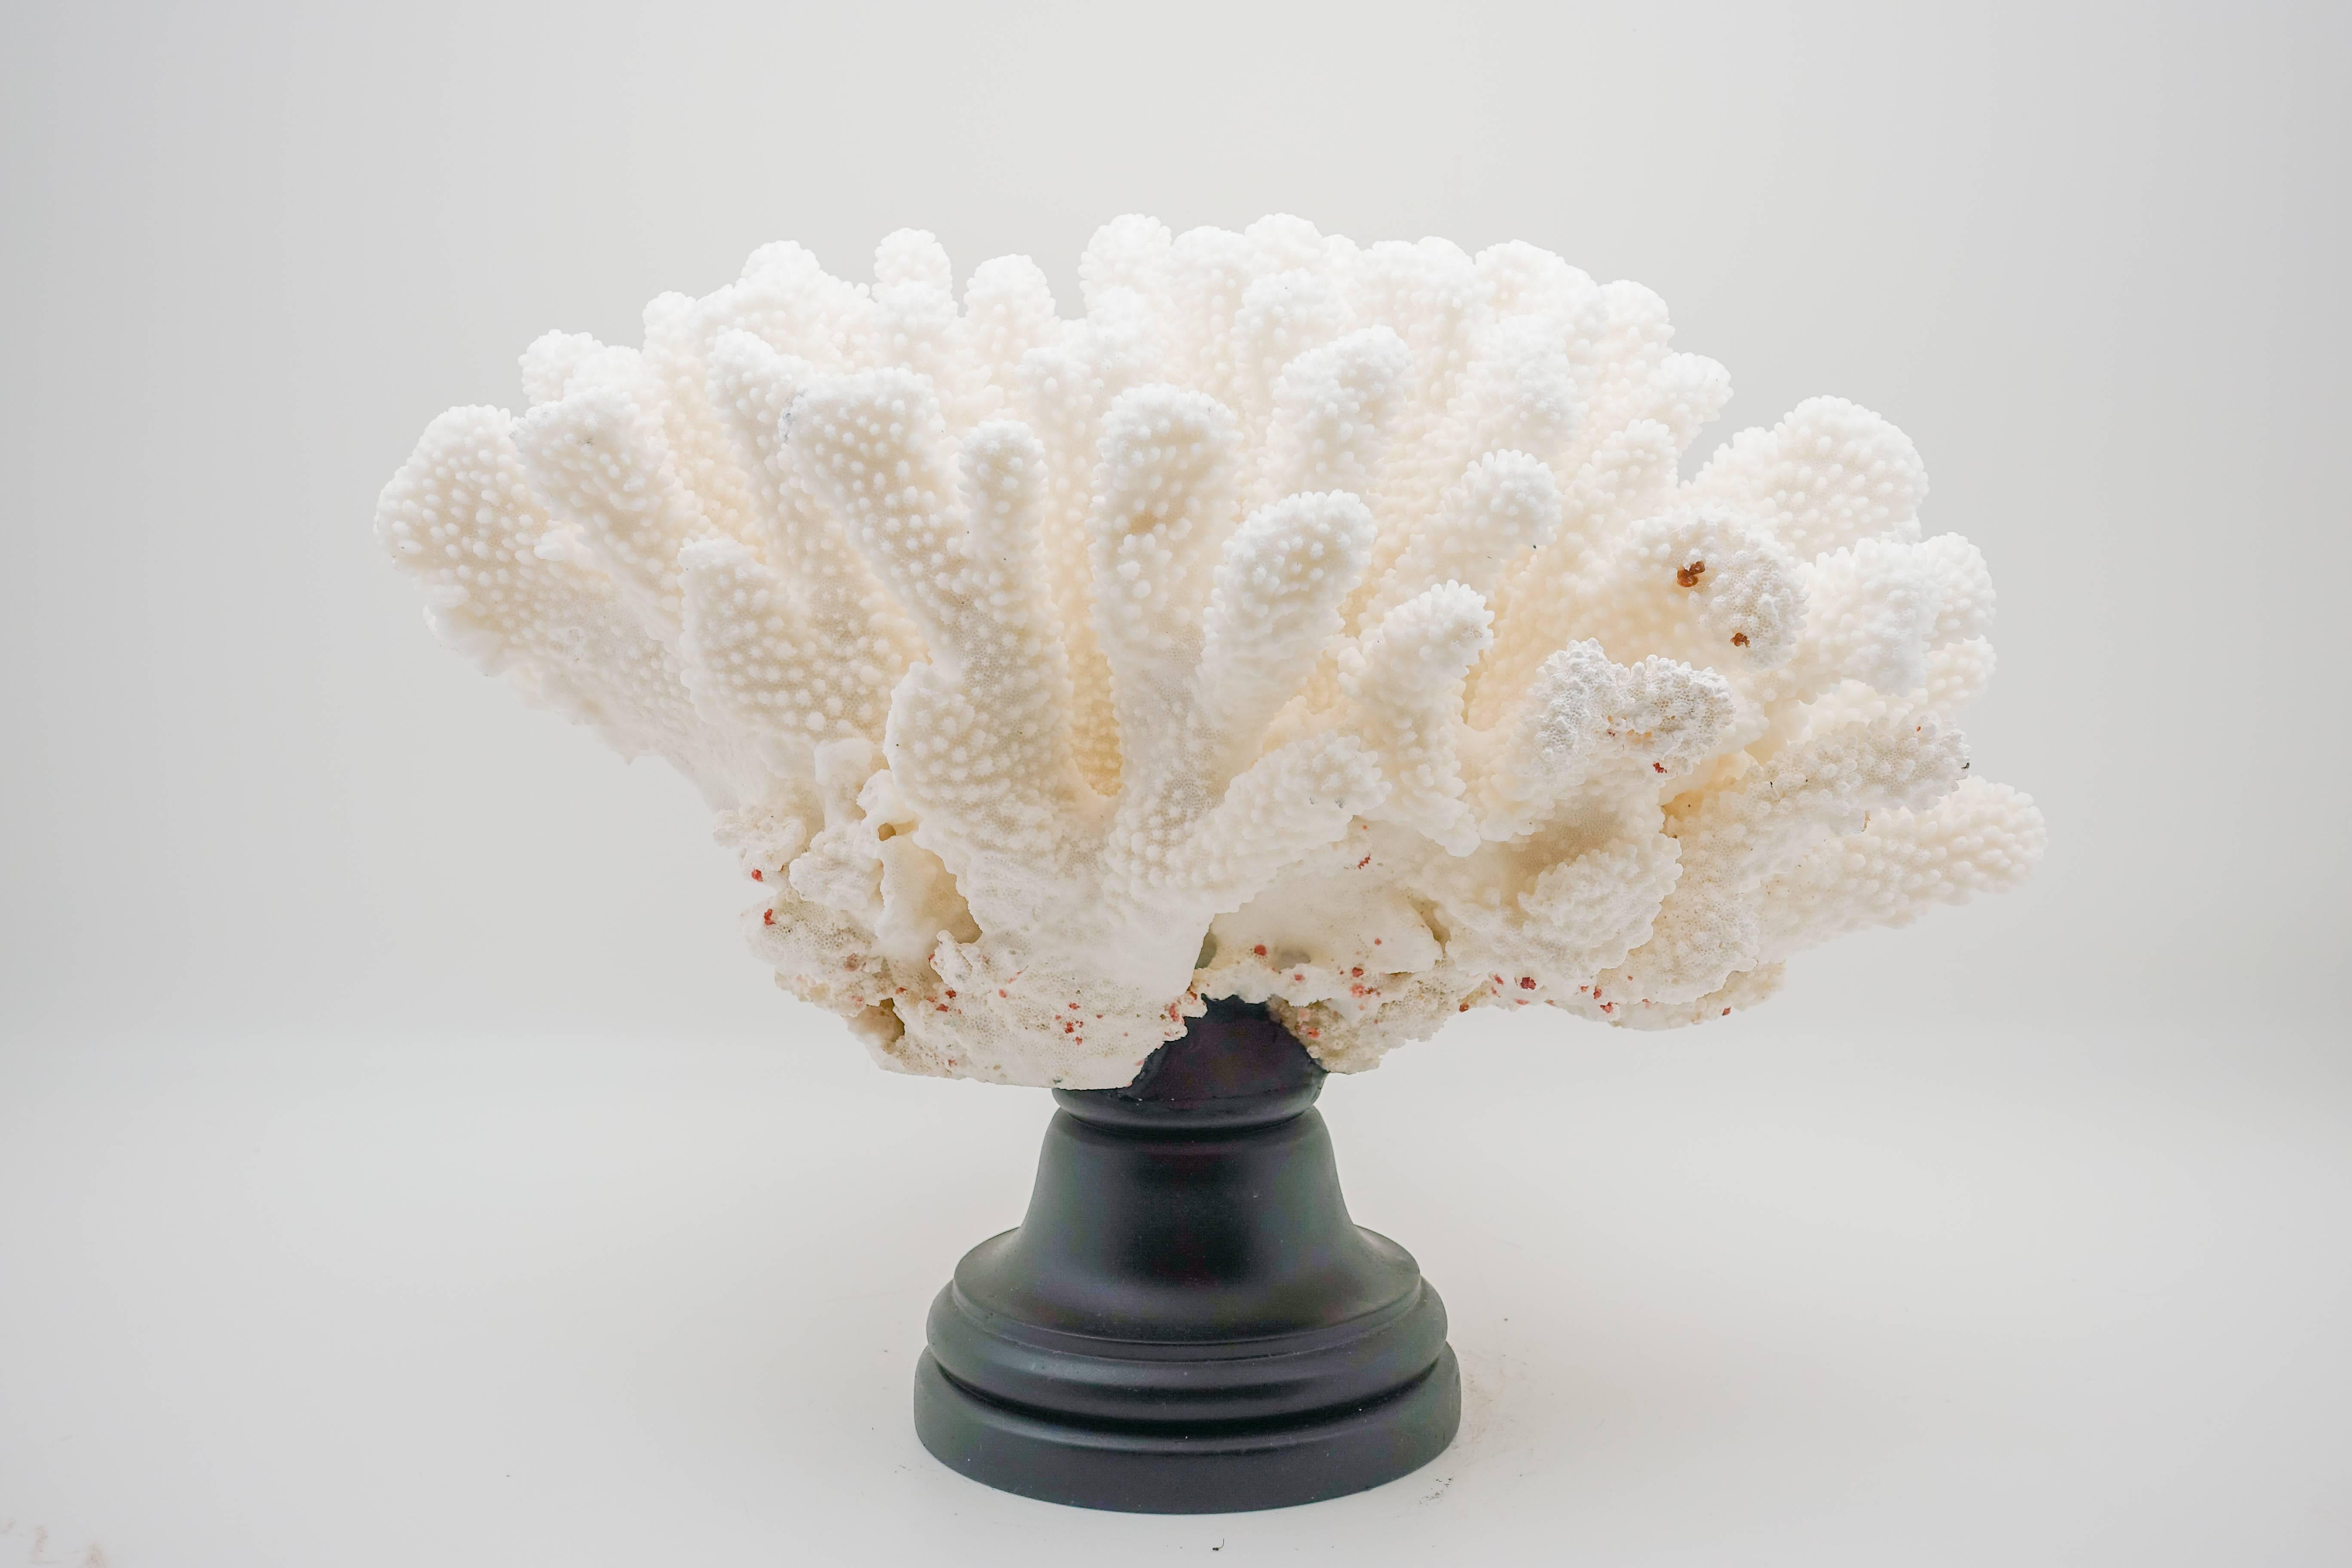 Large custom mounted cats paw coral. Cats paw coral is very sturdy with white extremities that resemble a cat's paw. Real coral adds natural beauty to your surroundings.